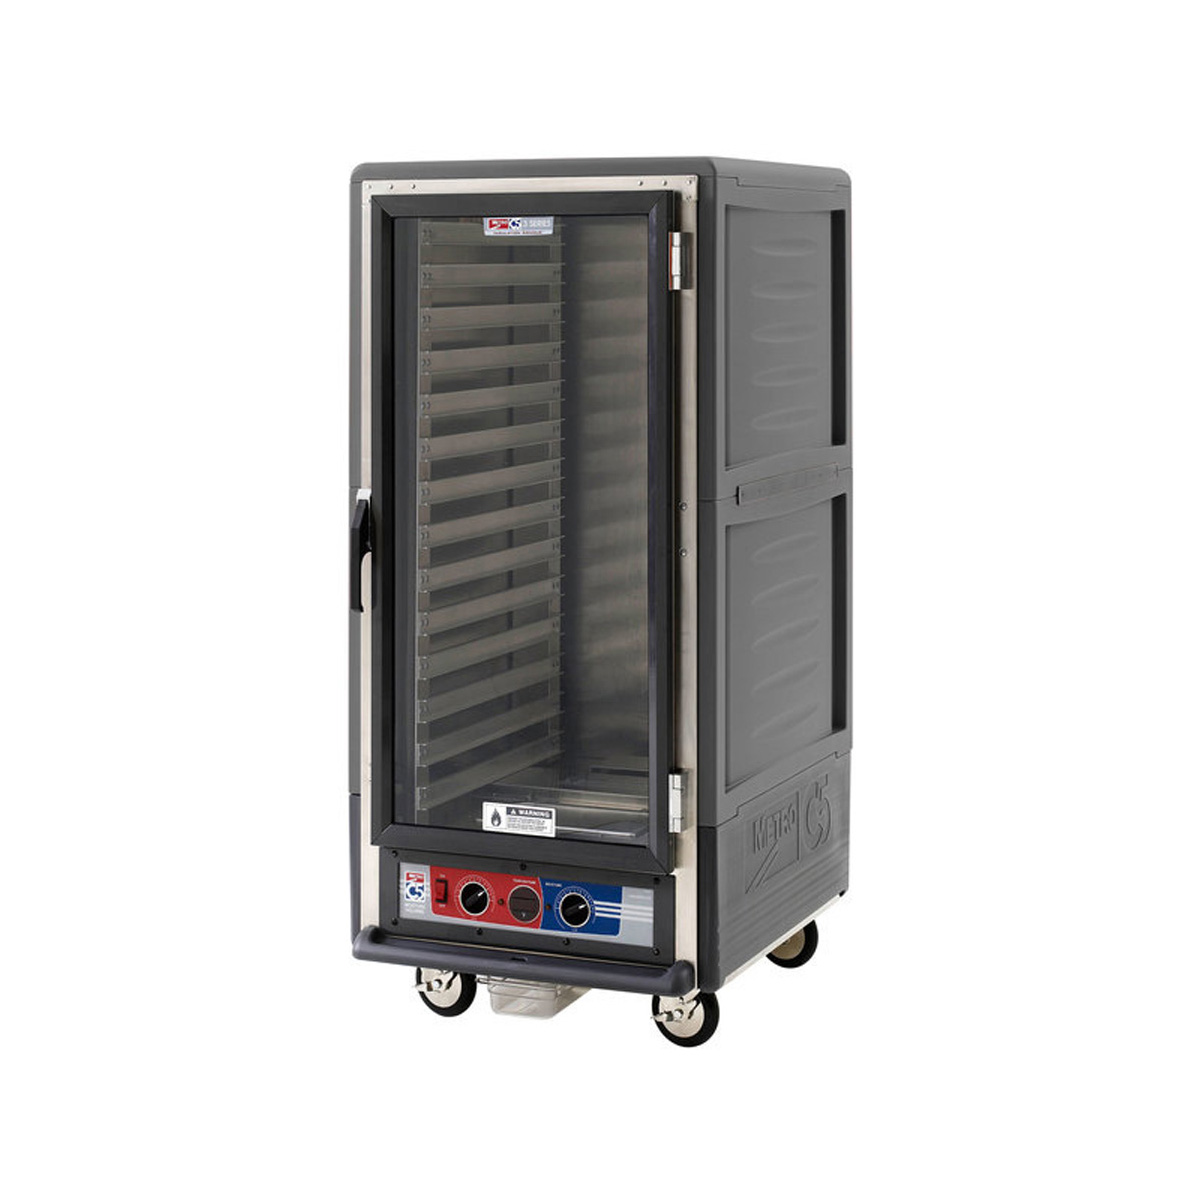 Metro C537-MFC-L-GYA C5 3 Series Insulated Mobile Proofing and Holding Cabinet